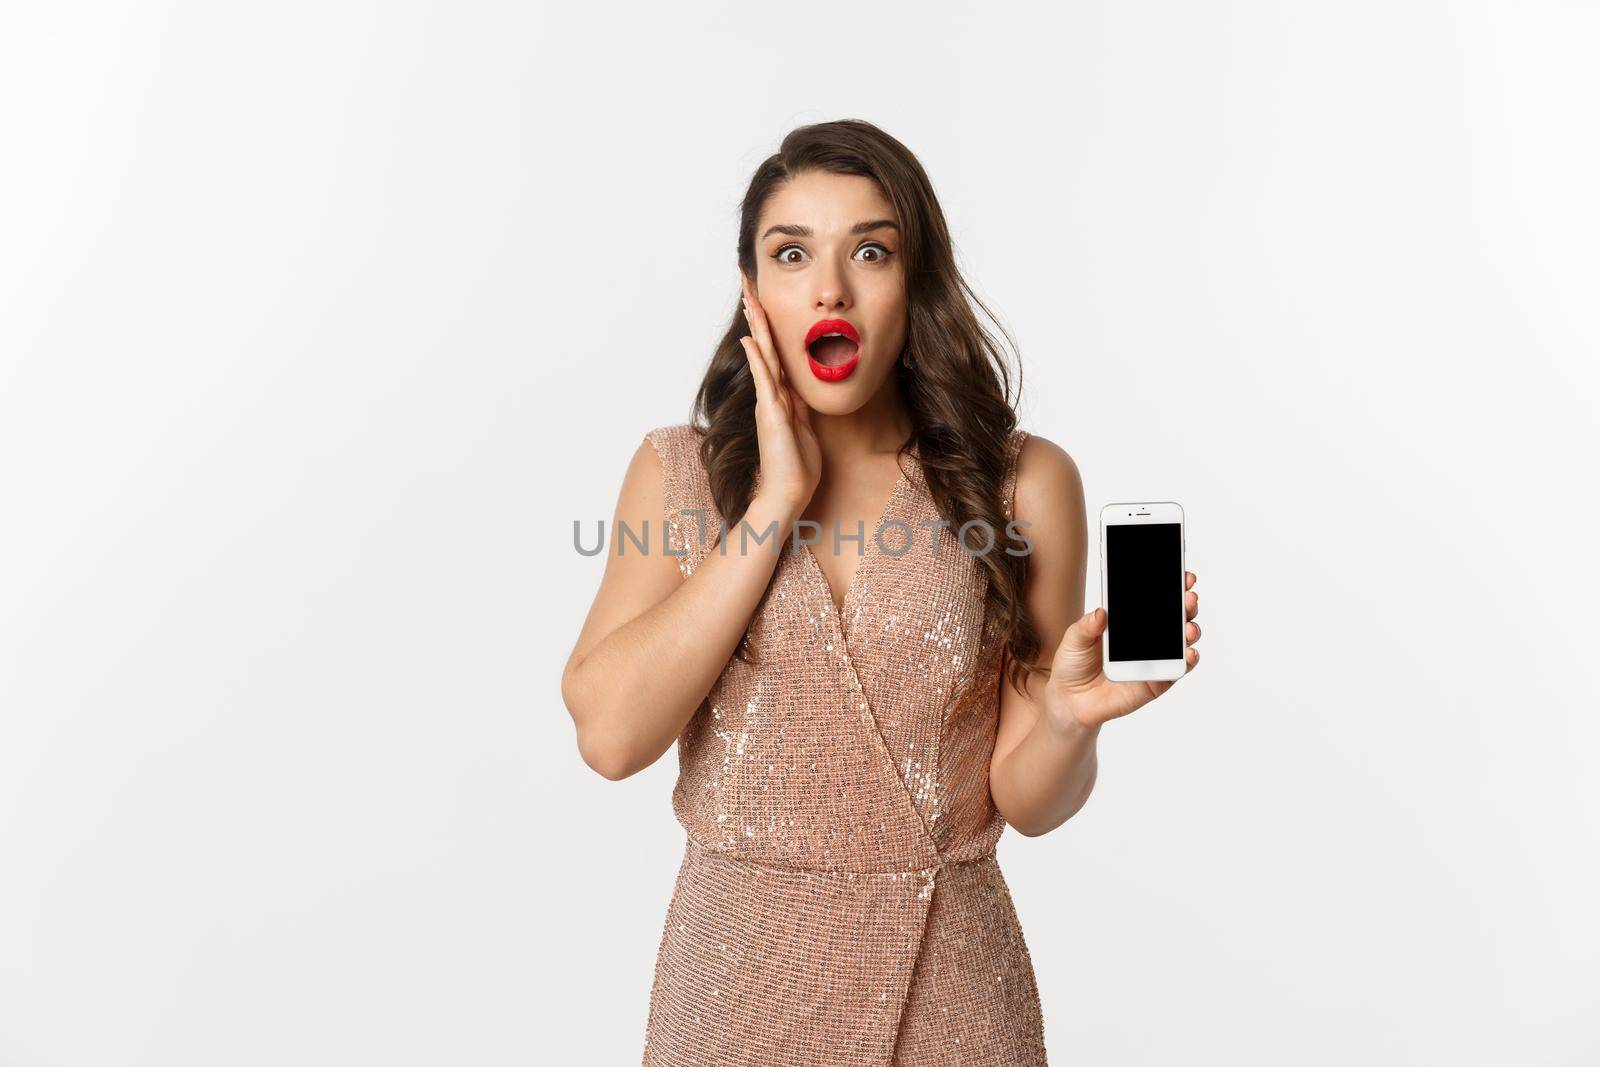 Online shopping. Elegant woman in luxury dress showing smartphone screen, looking amazed at camera, white background.